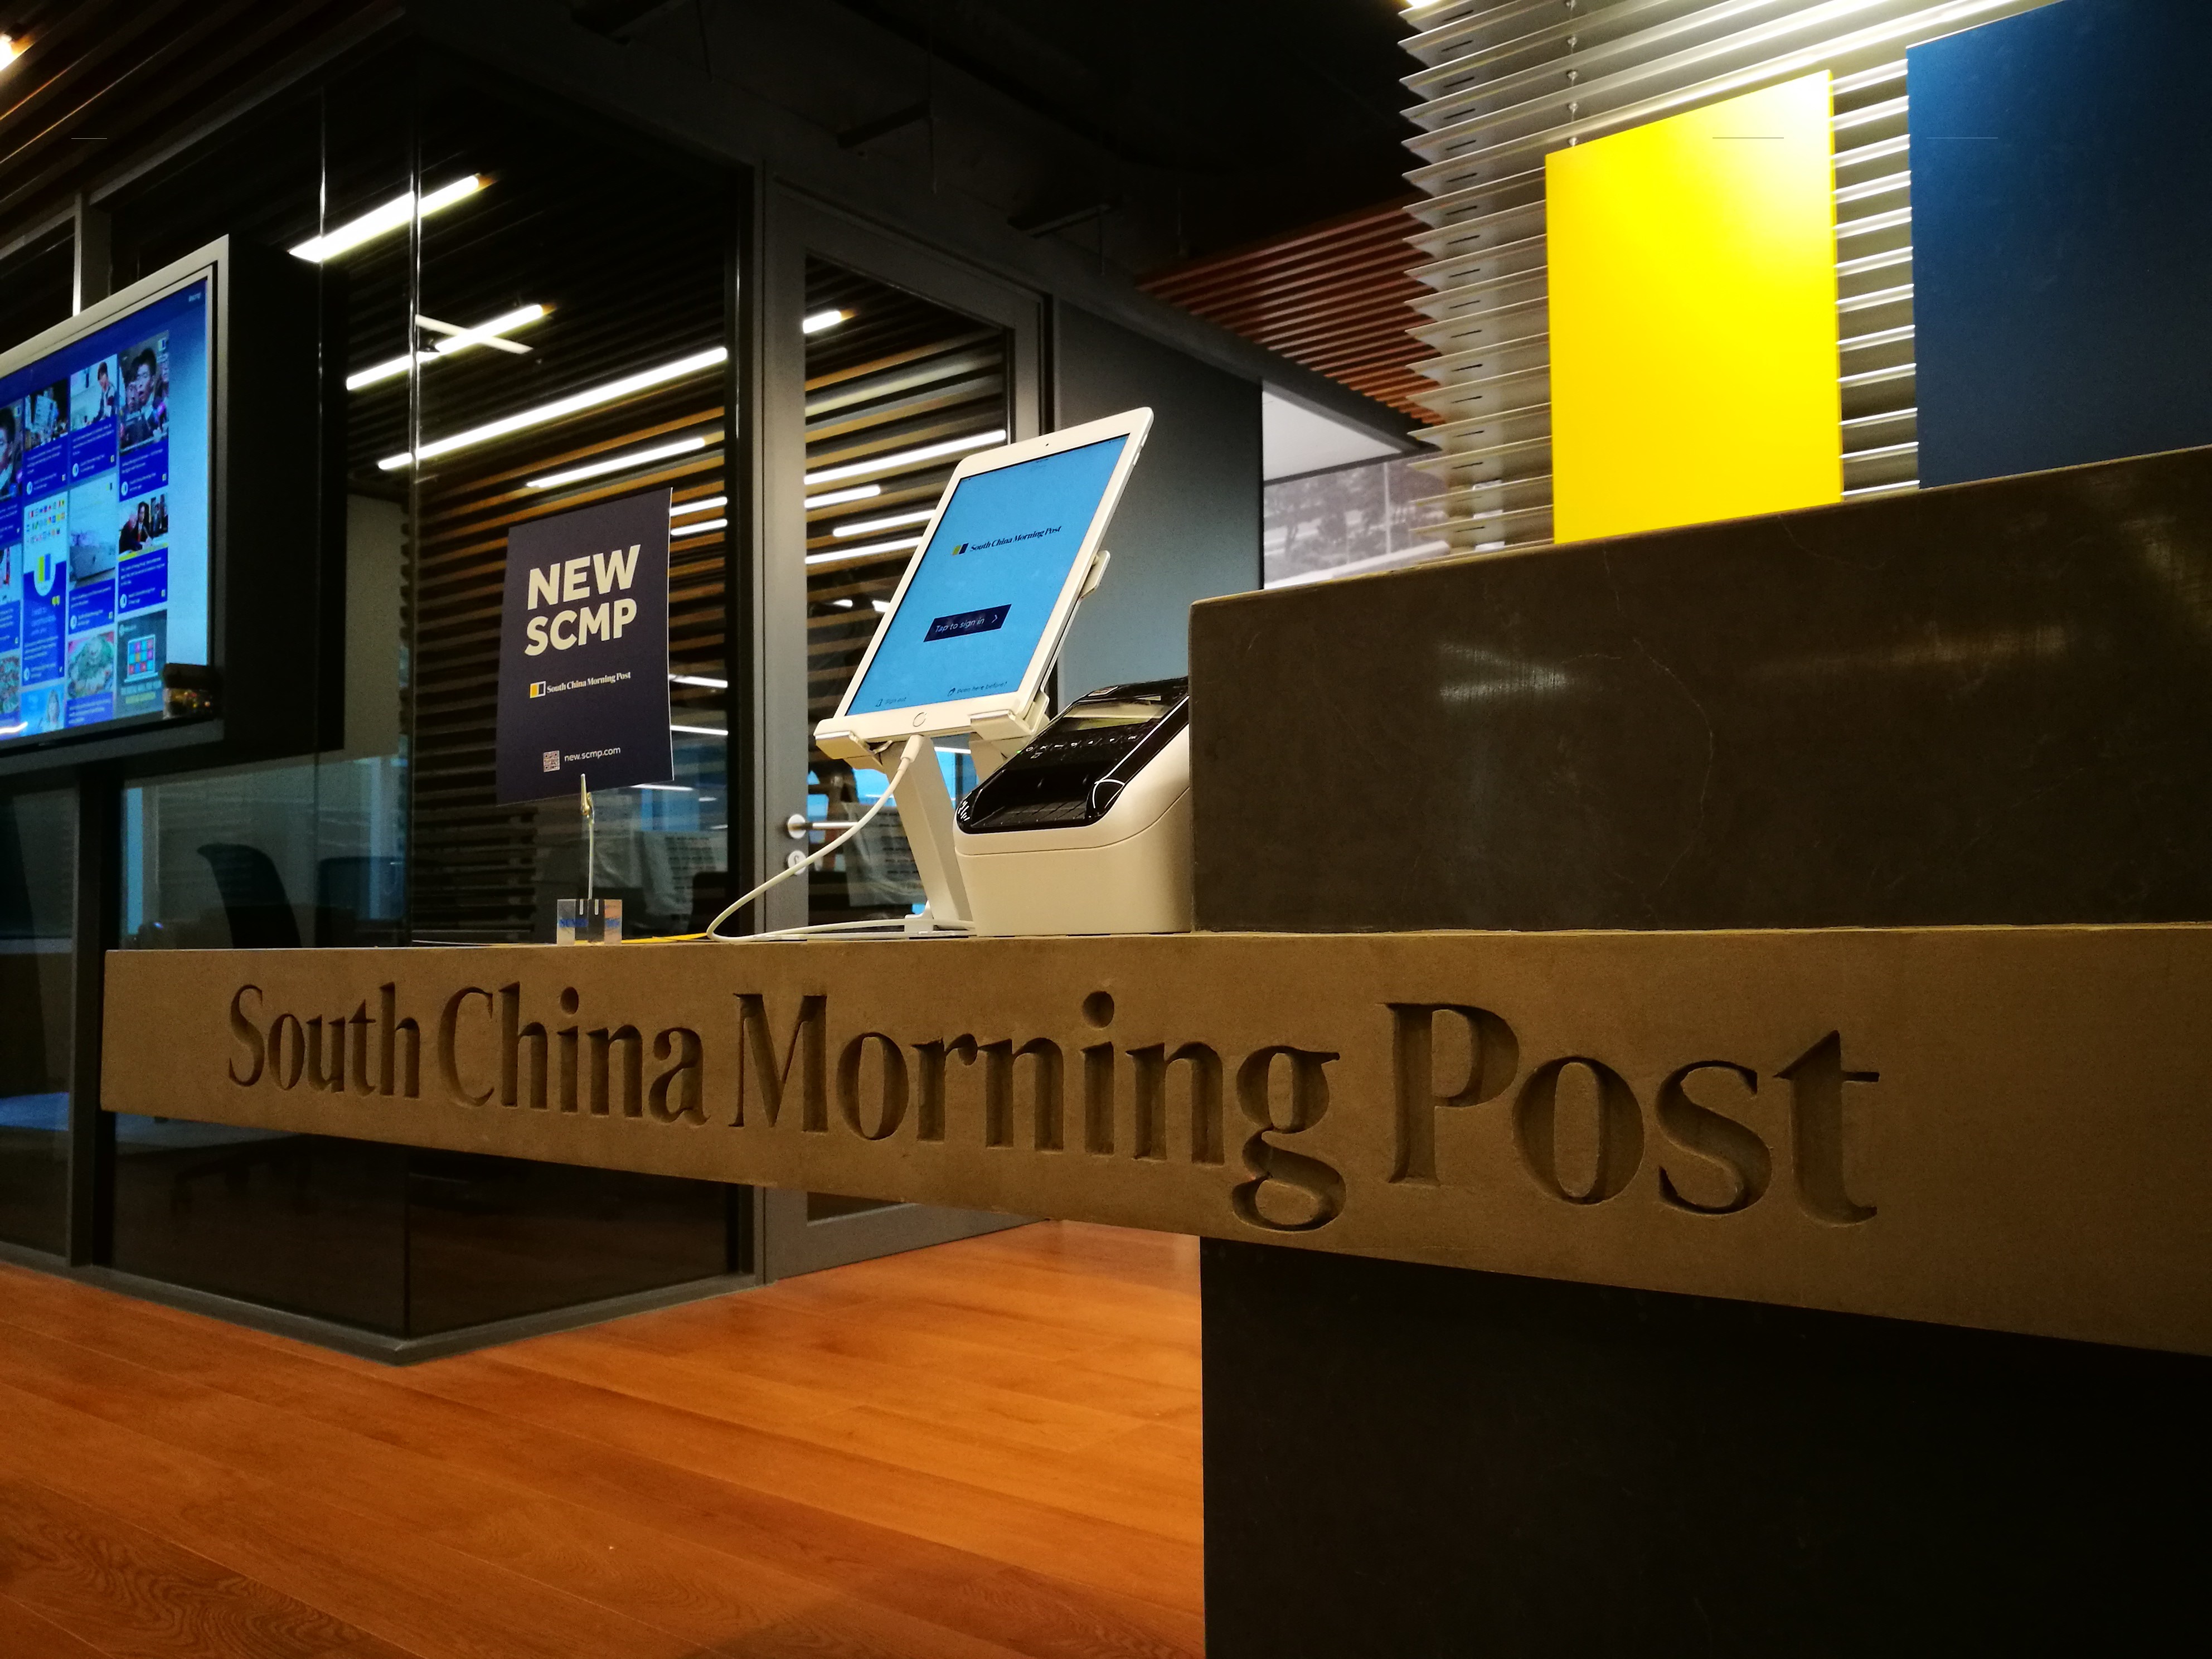 South China Morning Post's Times Square new office. 07FEB18